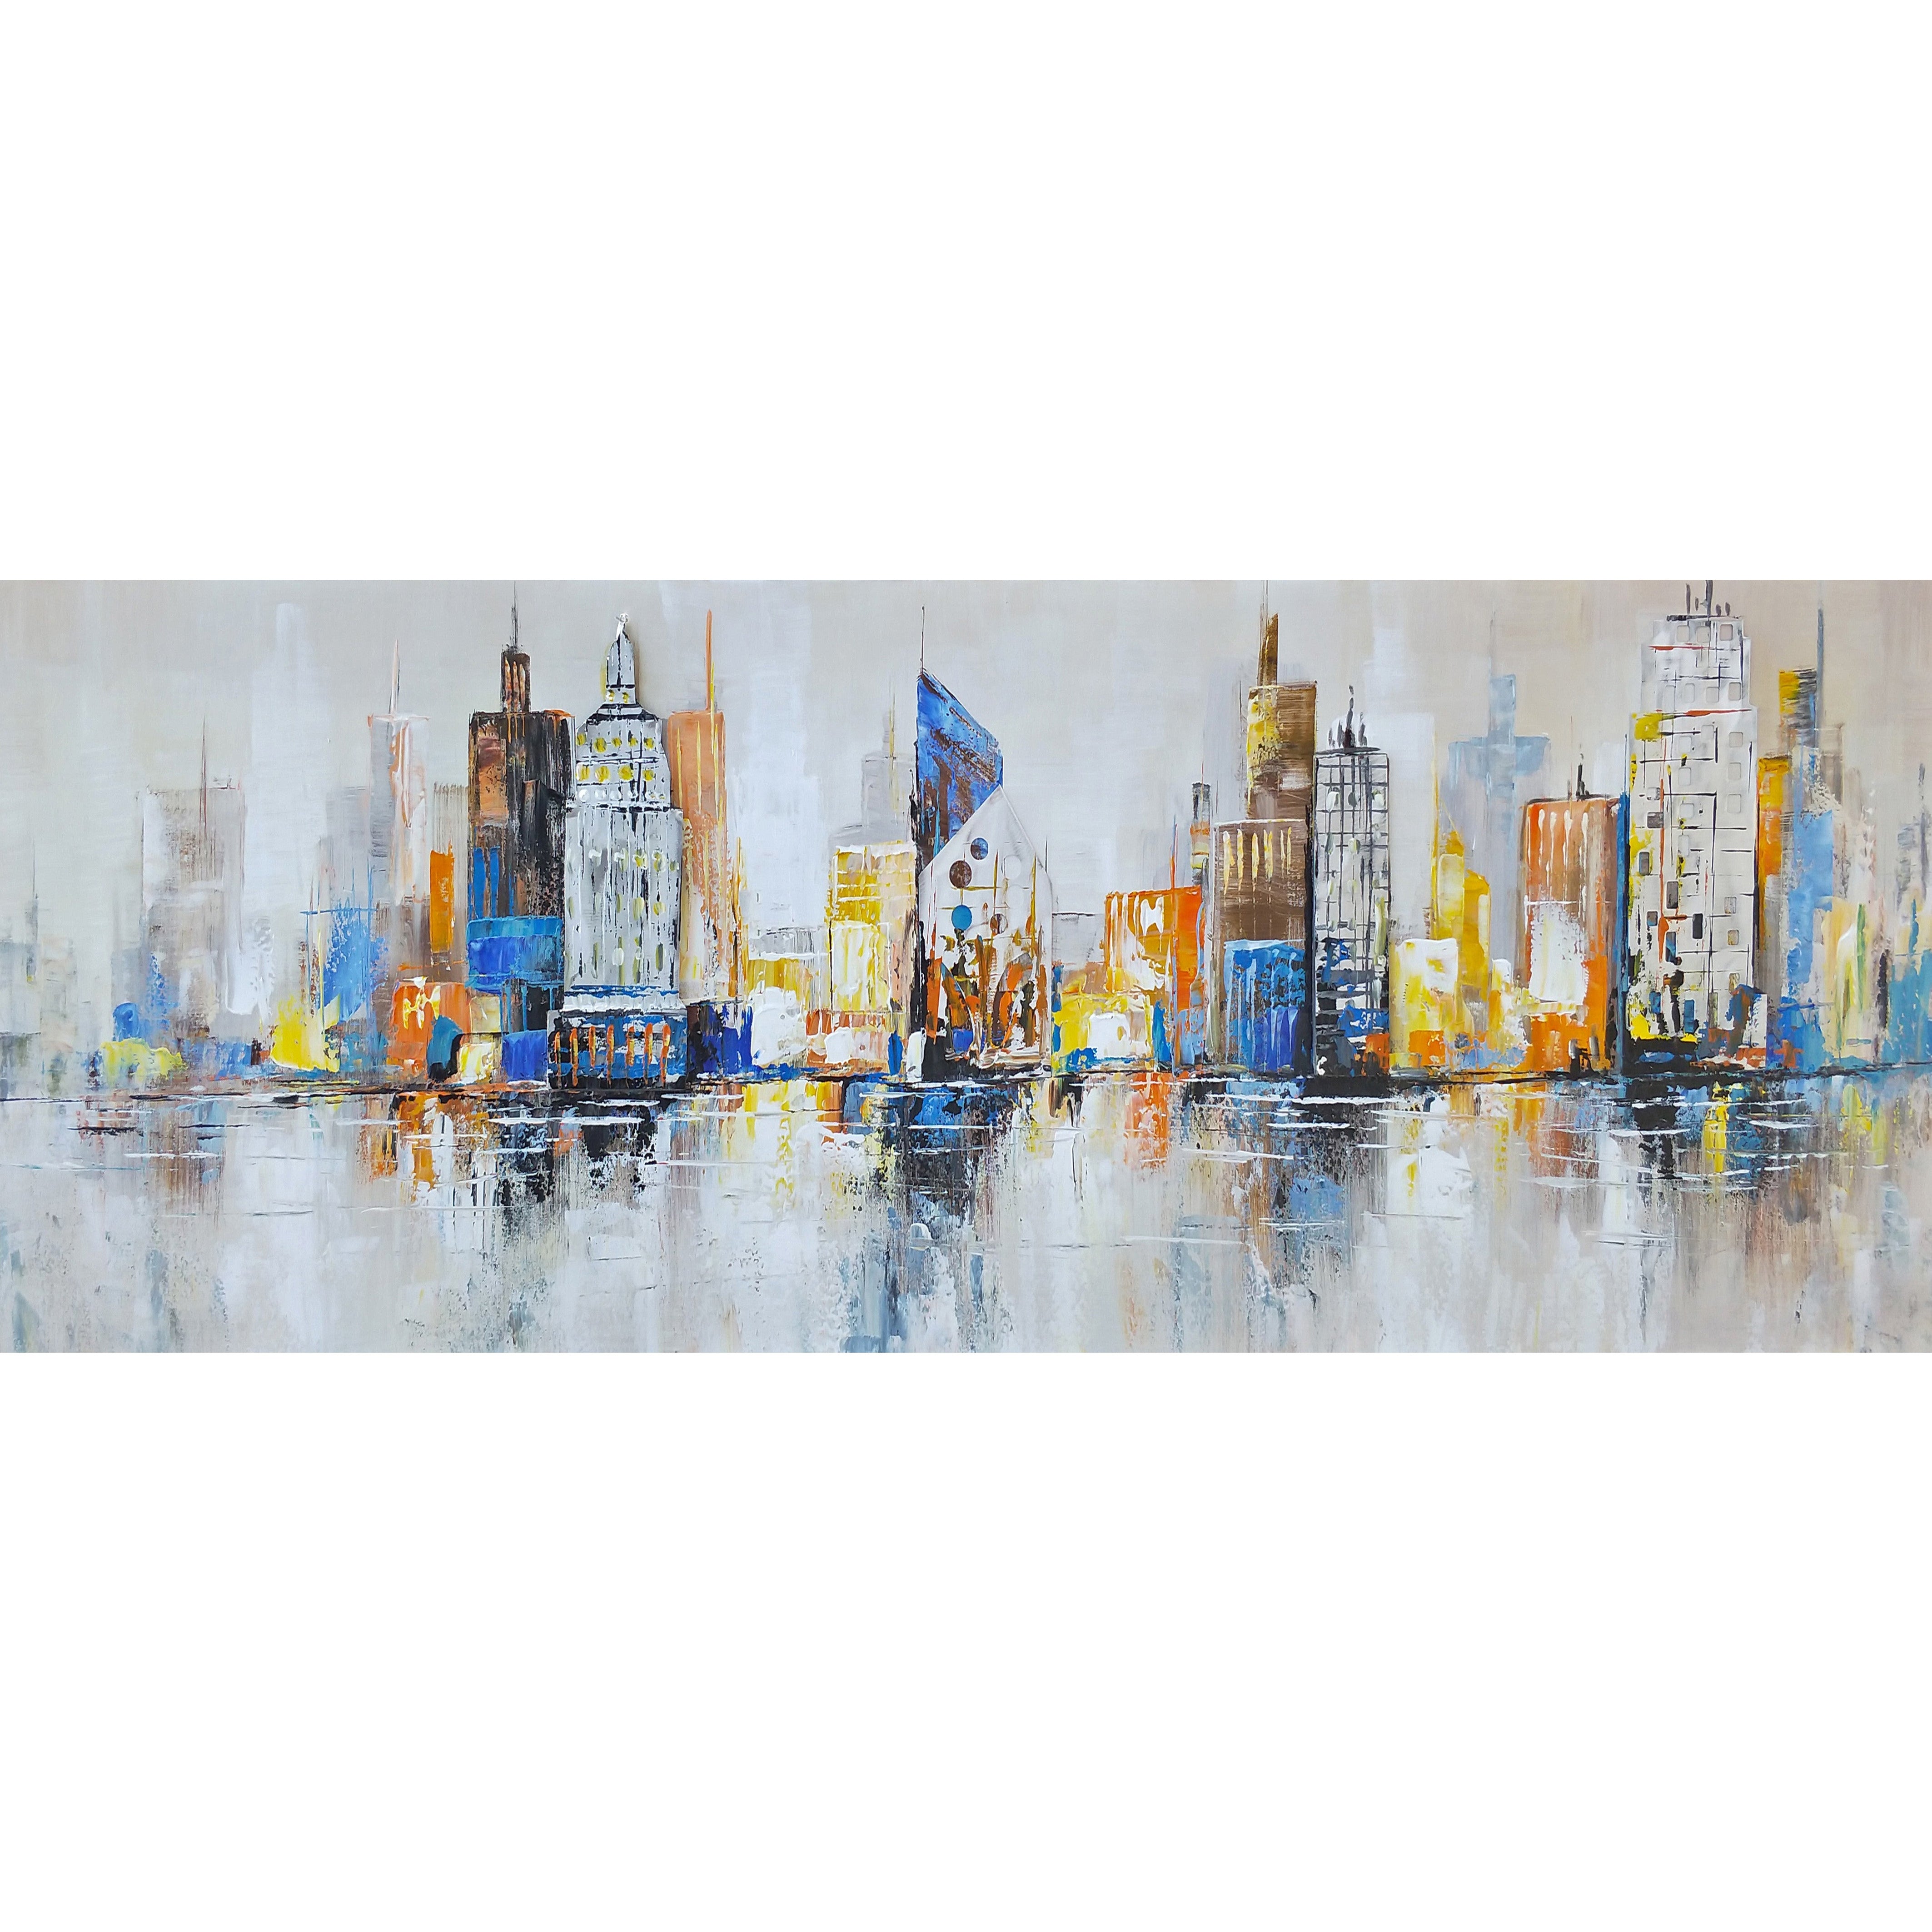 Oil painting | 60x150 cm | Painting | p0067